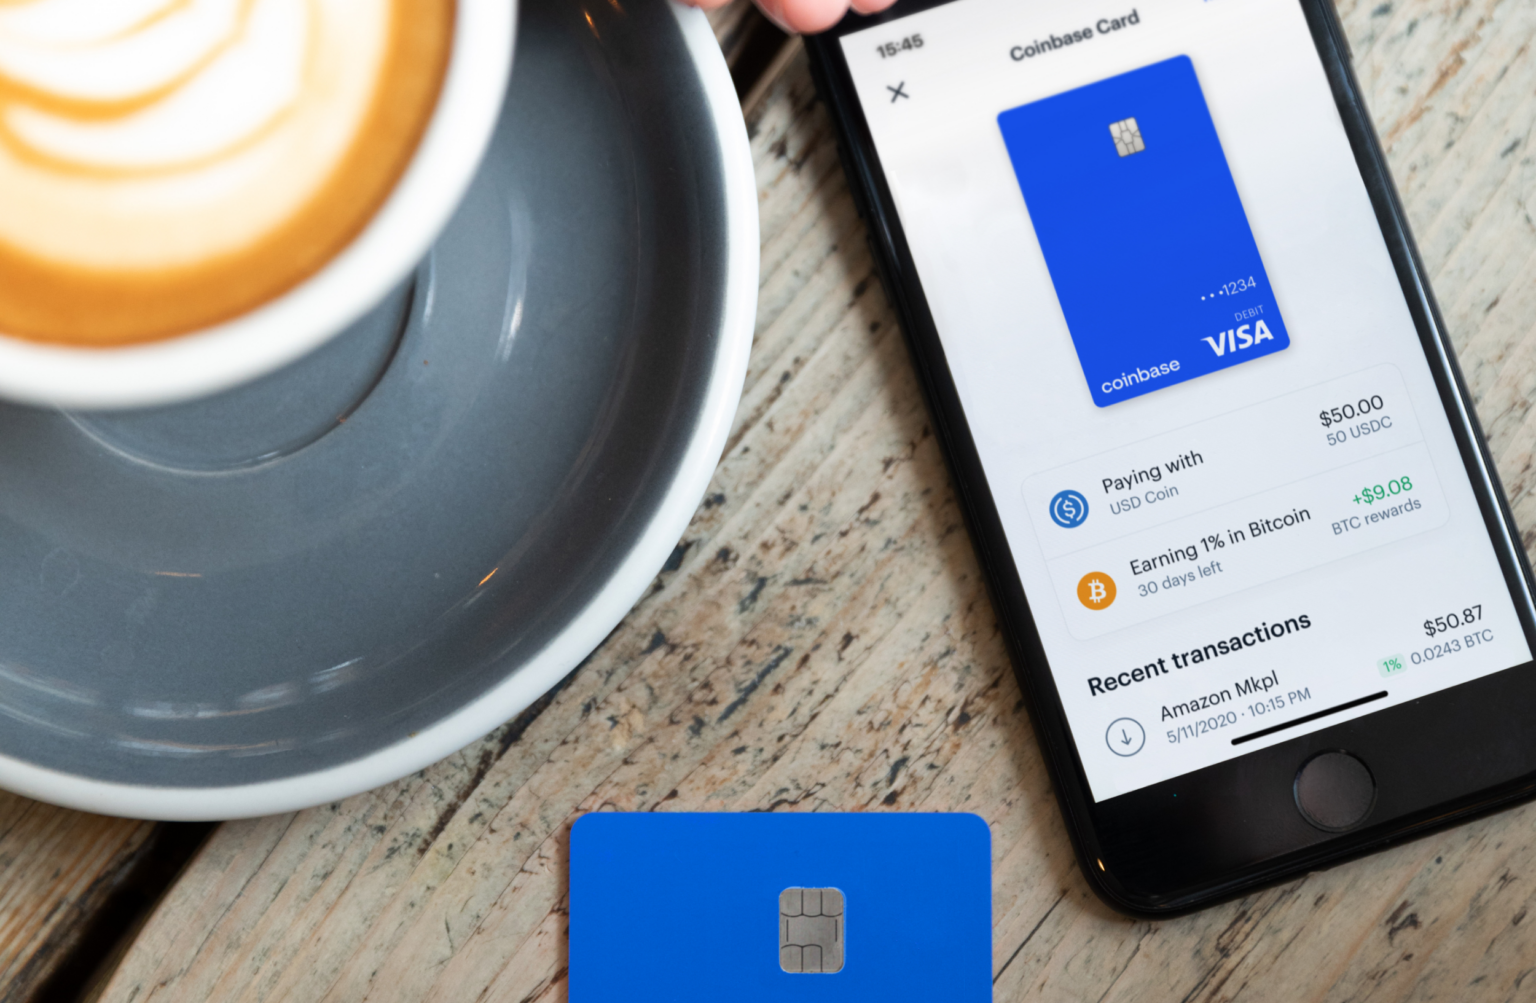 Case study: Coinbase brings crypto-backed card to reality